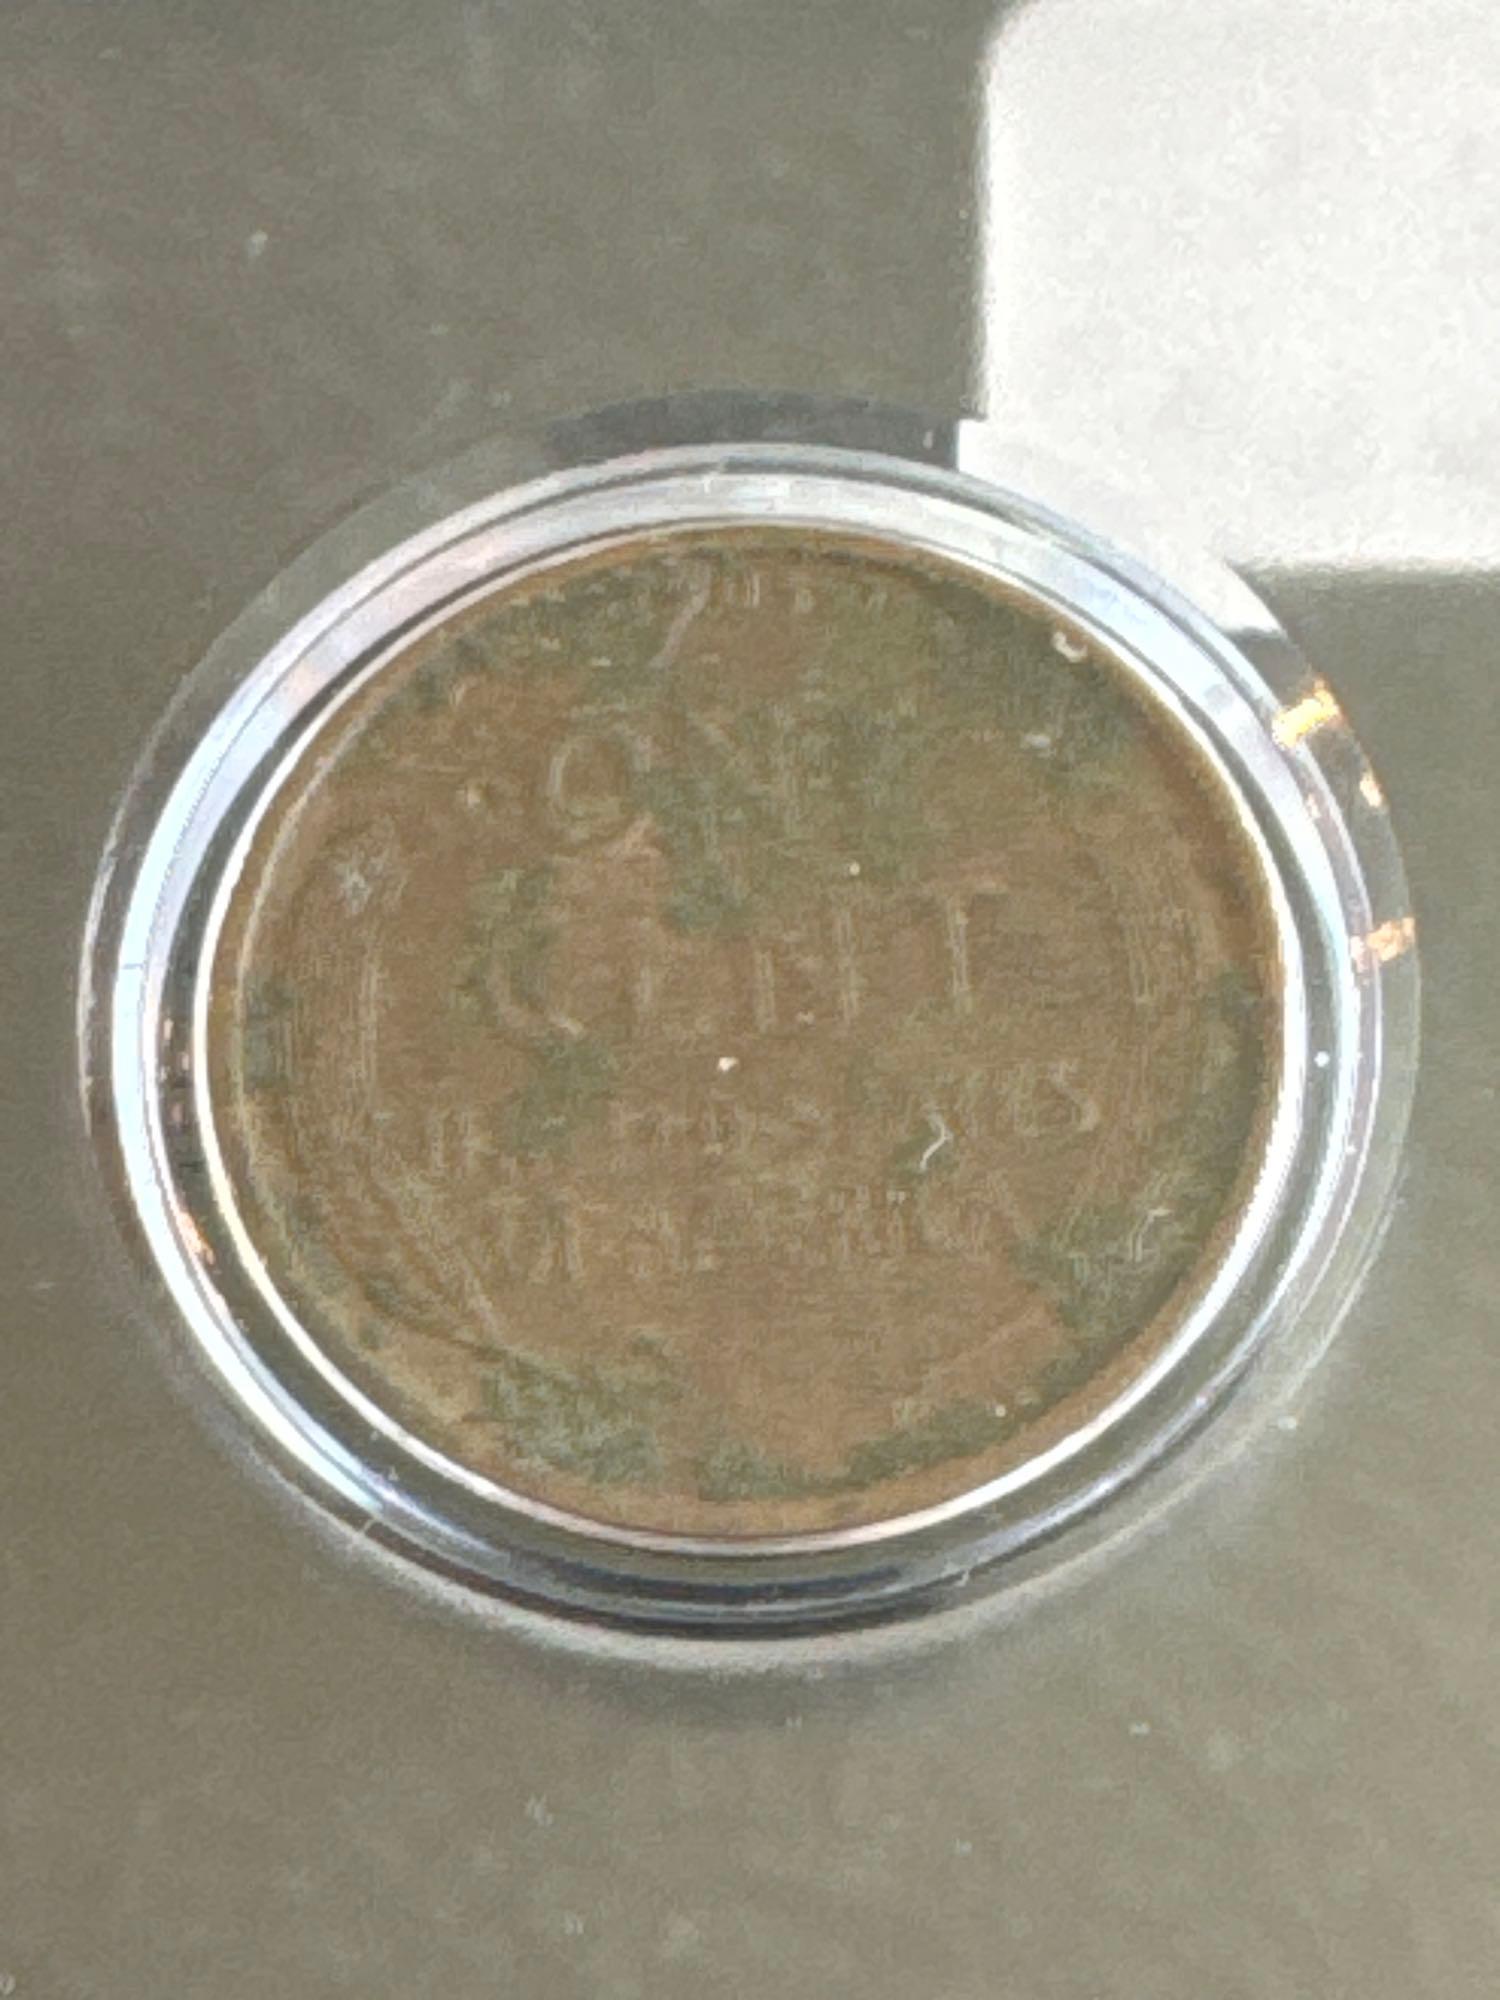 Lincoln Head Cents including 1909 VDB